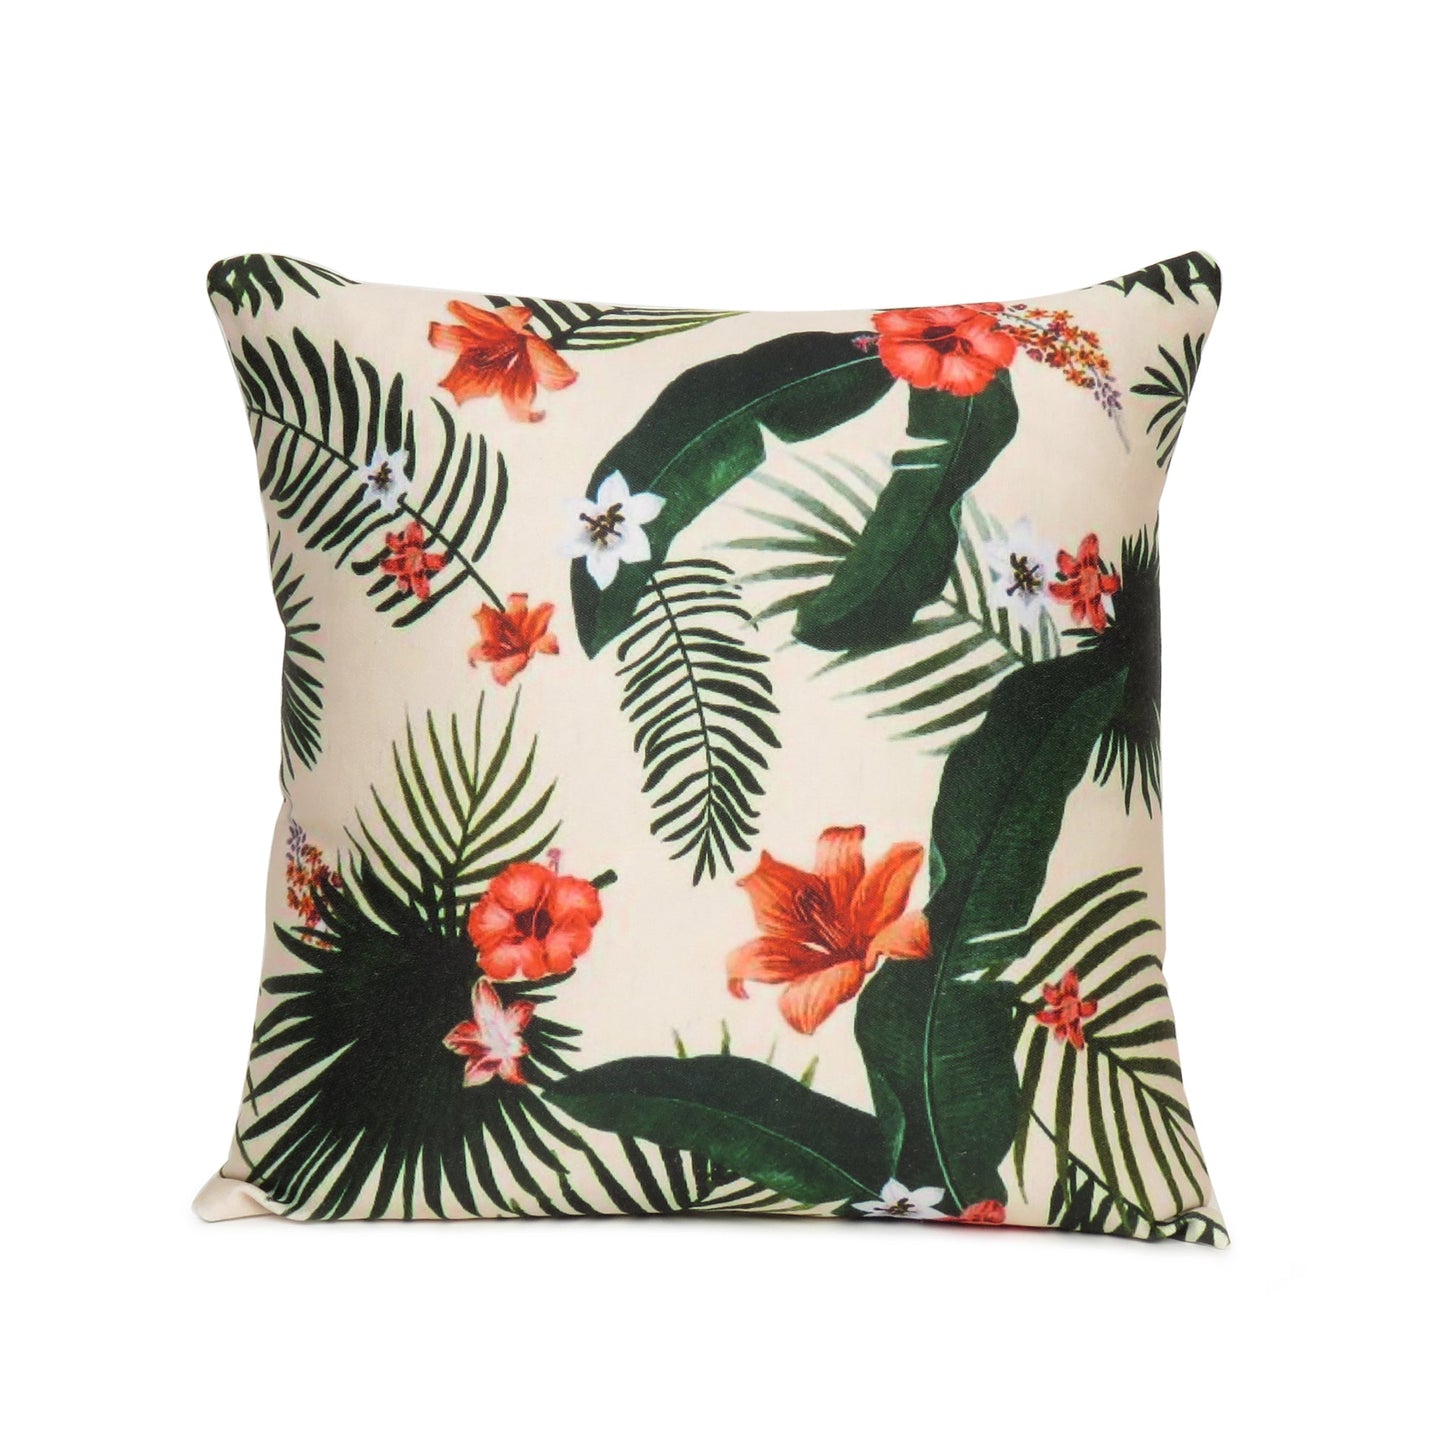 Beige Floral with Leaf Printed Cushion Cover in Set of 2